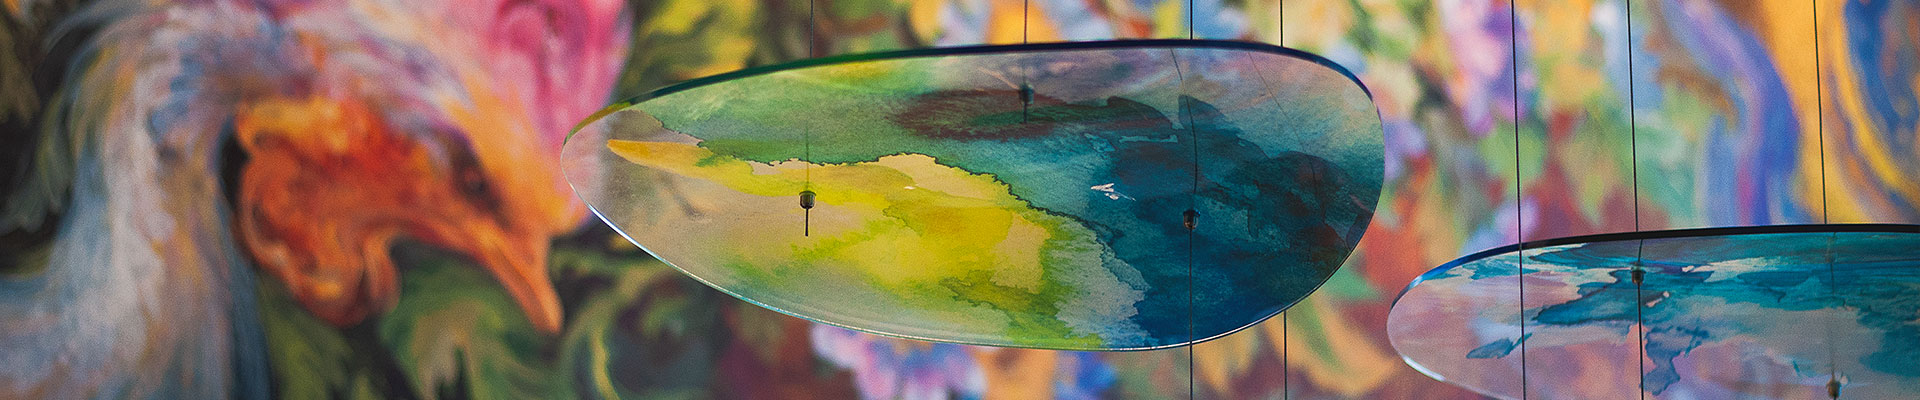 Close up of glass lamp structure next to mural